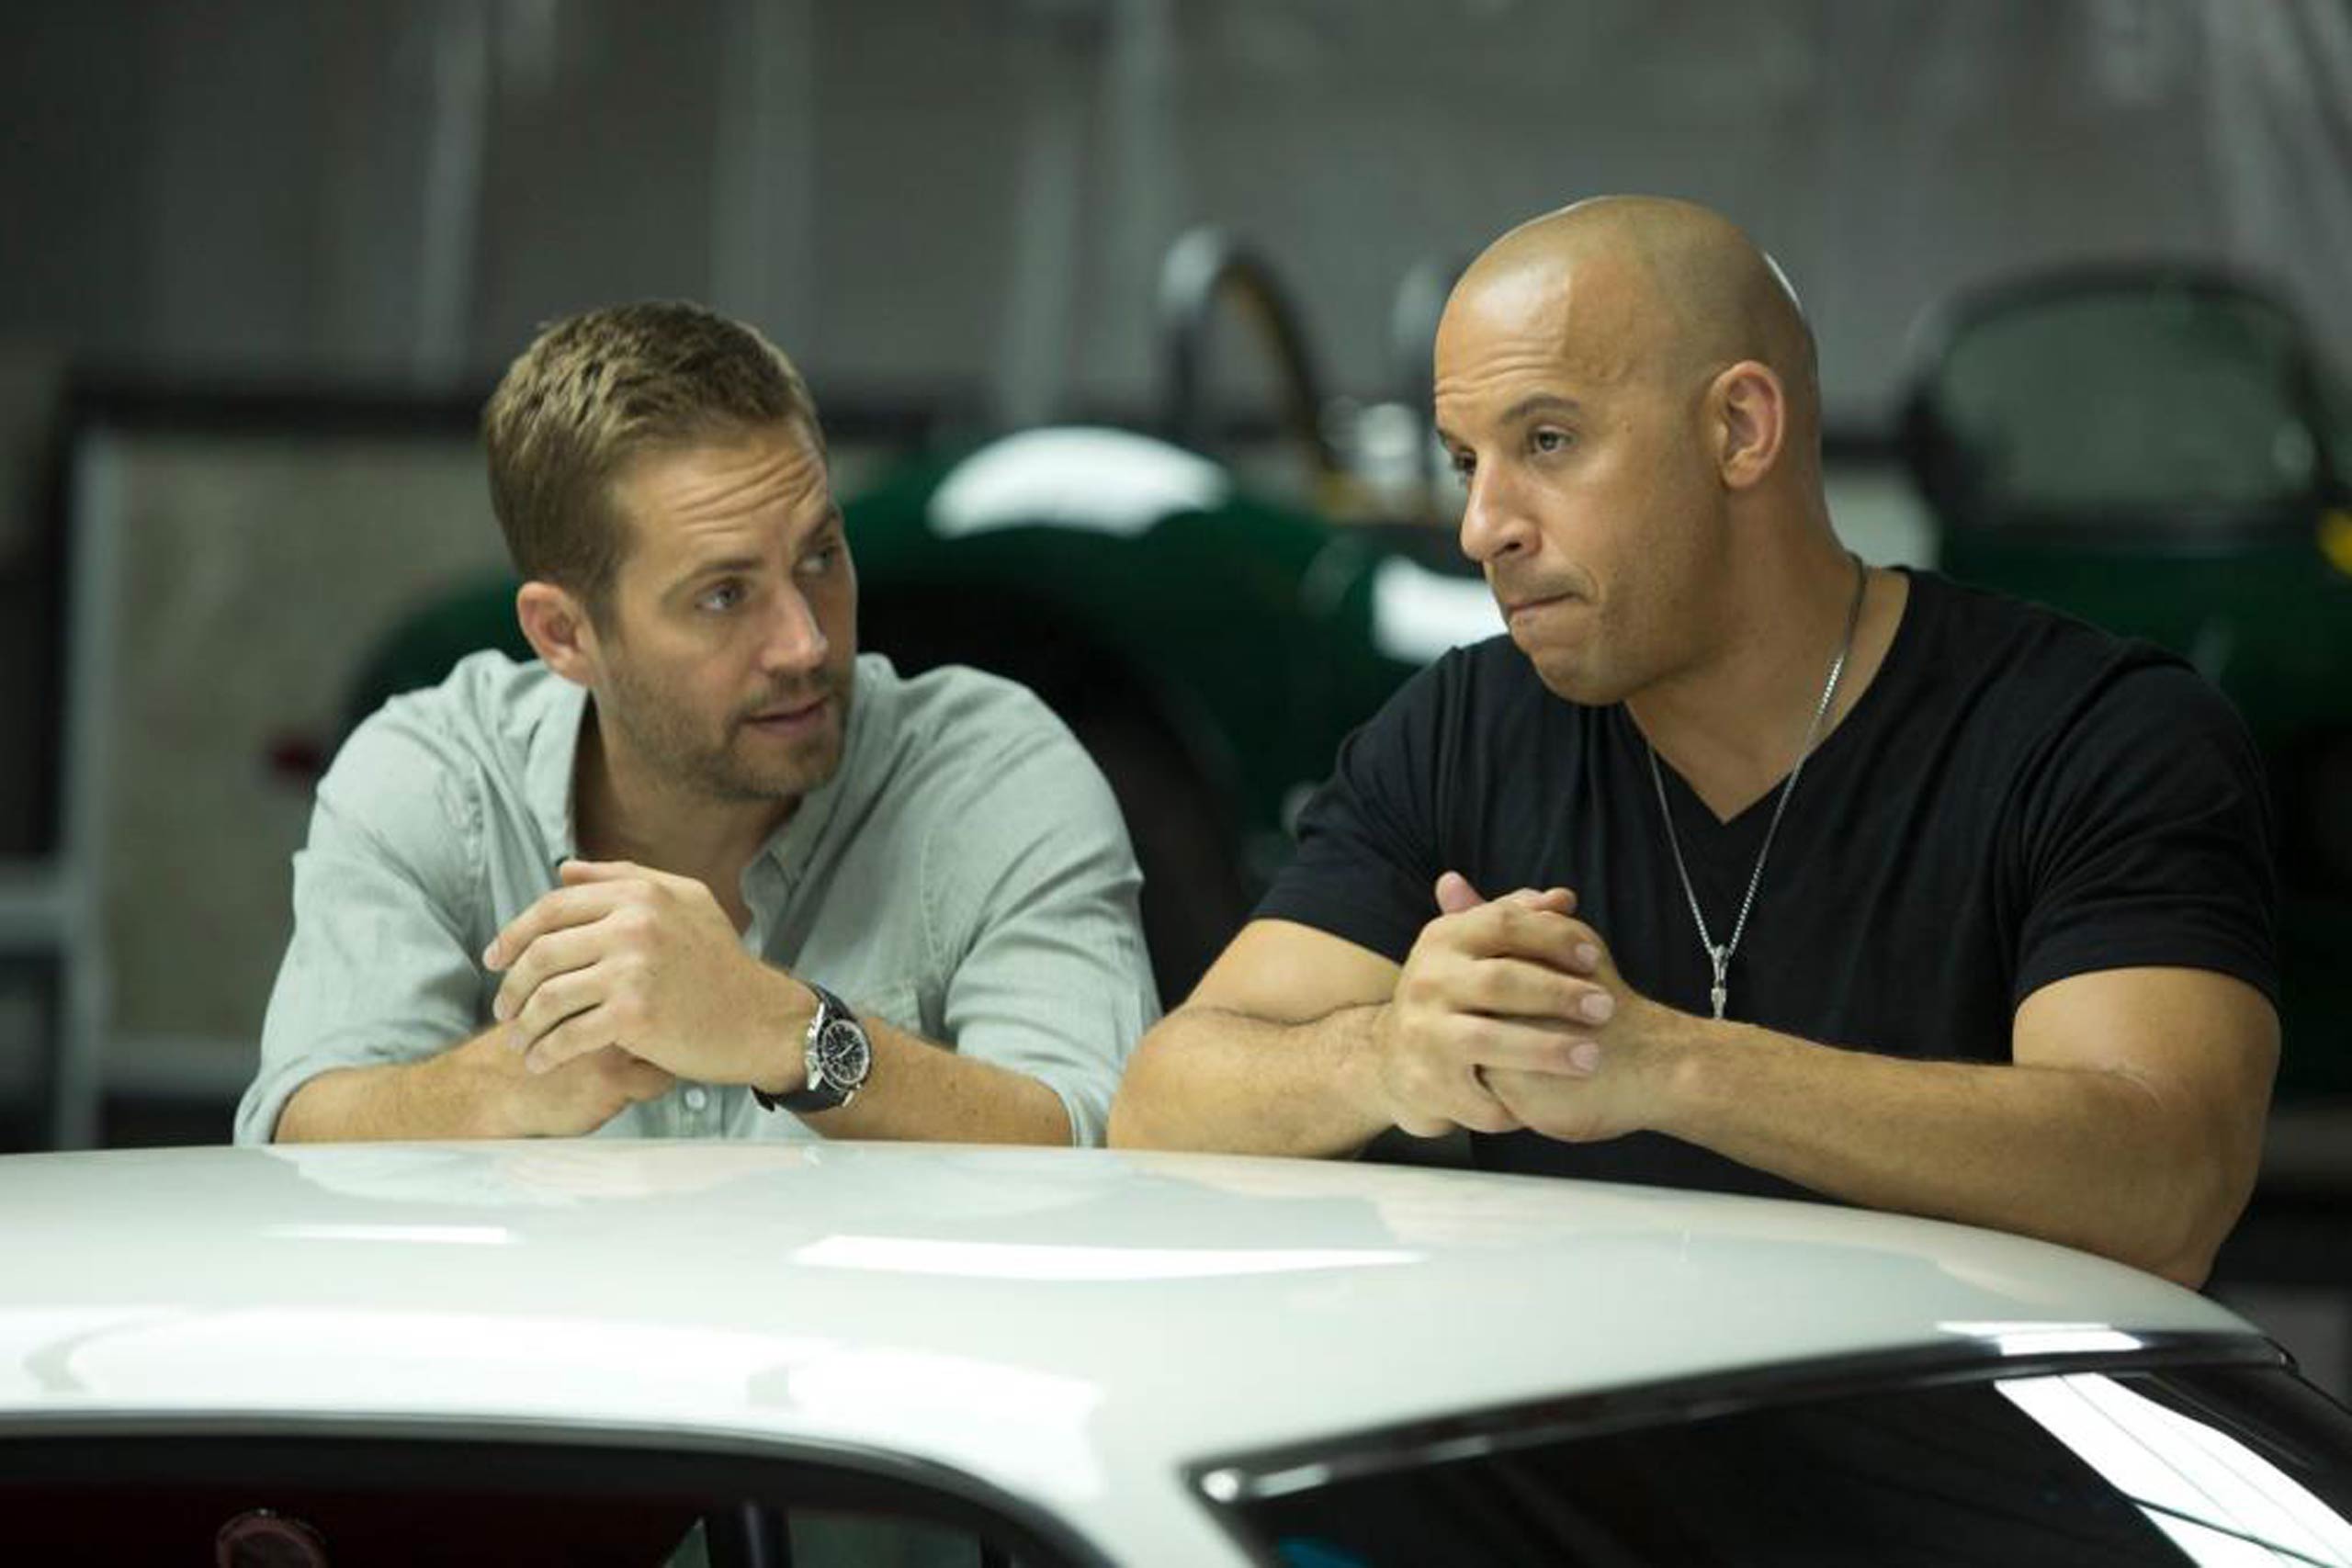 <strong>Brian O'Conner and Dominic Toretto in <i>The Fast and the Furious</i></strong> (Universal)